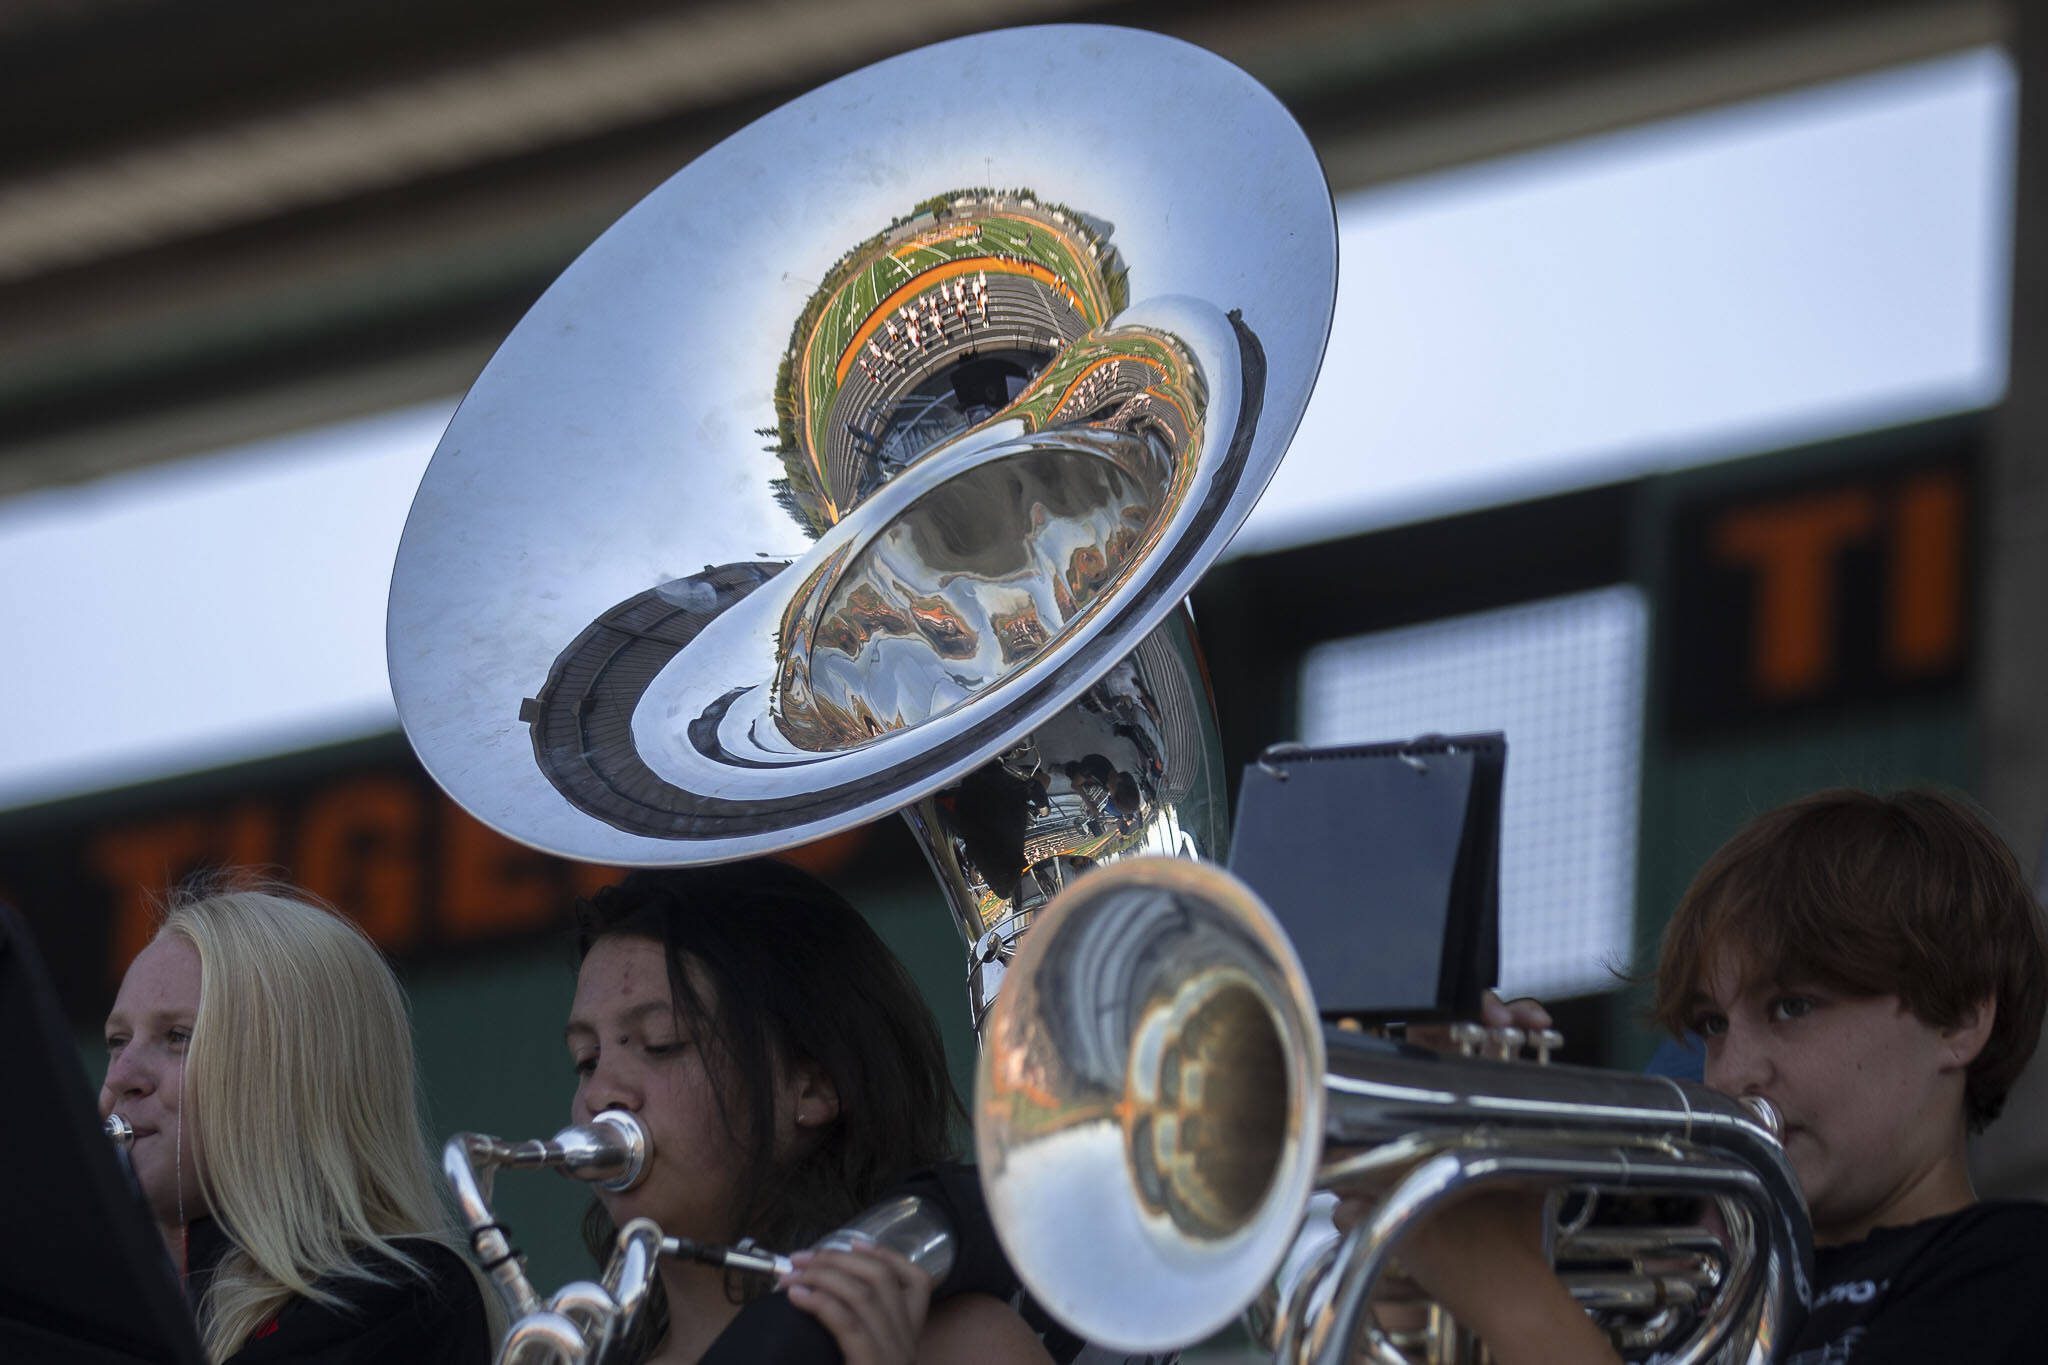 The Granite Falls marching band perform during a soft opening for the new track and field at Granite Falls High School in Granite Falls, Washington on Monday, Aug. 14, 2023. (Annie Barker / The Herald)